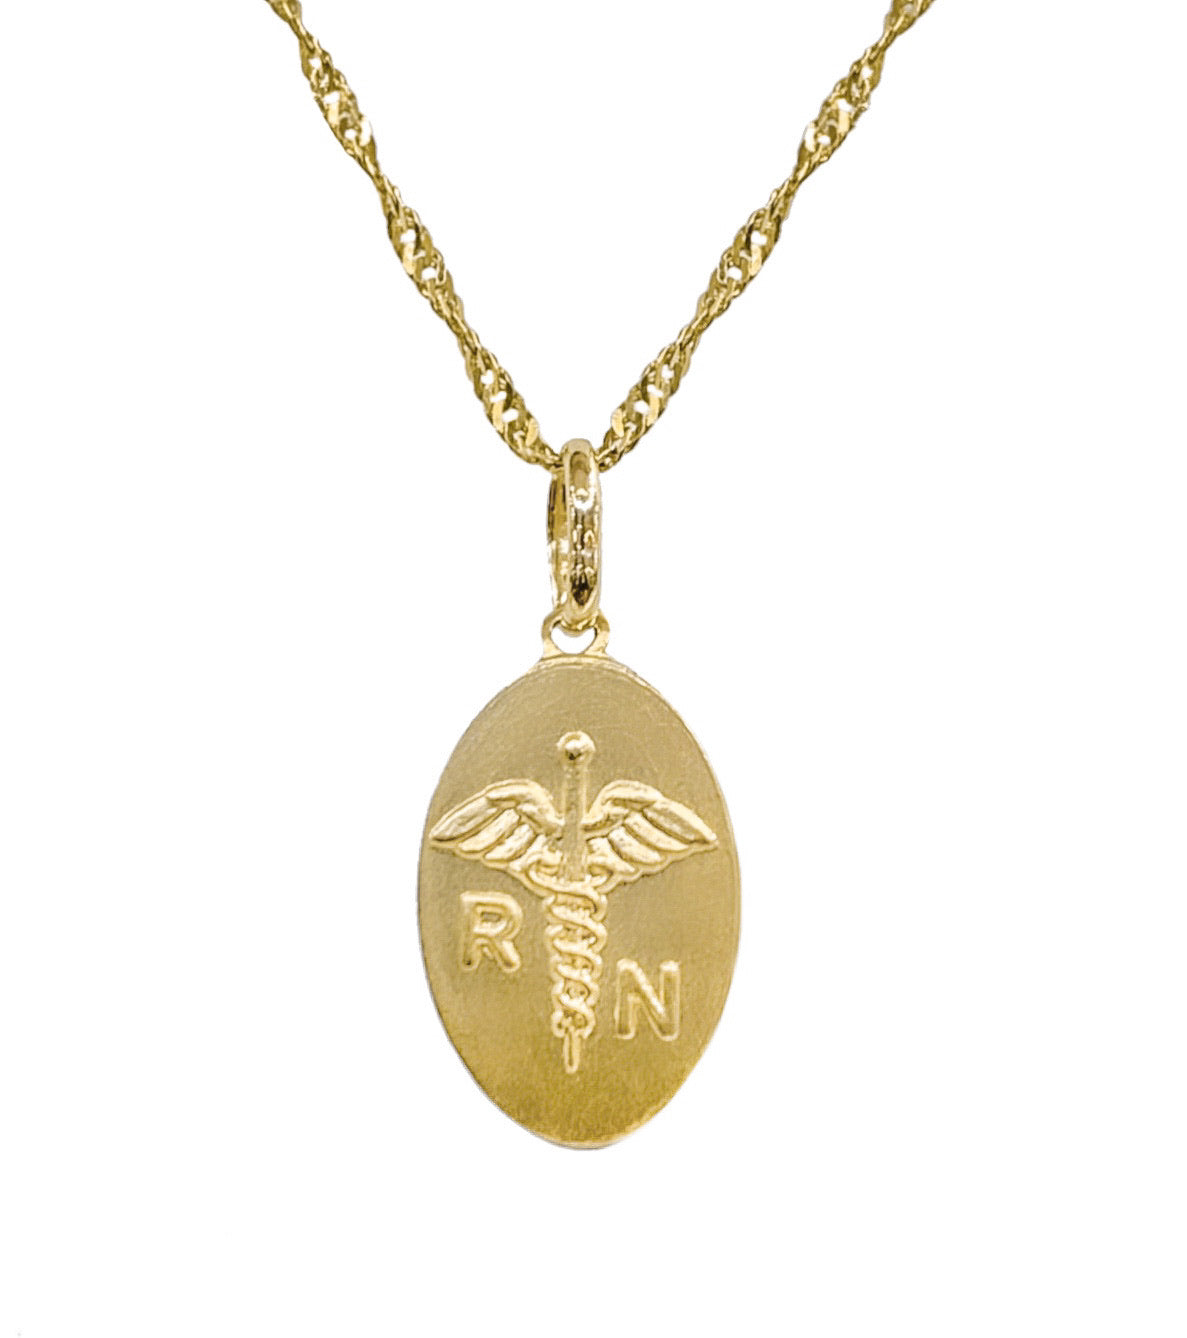 14K YELLOW GOLD RN NECKLACE